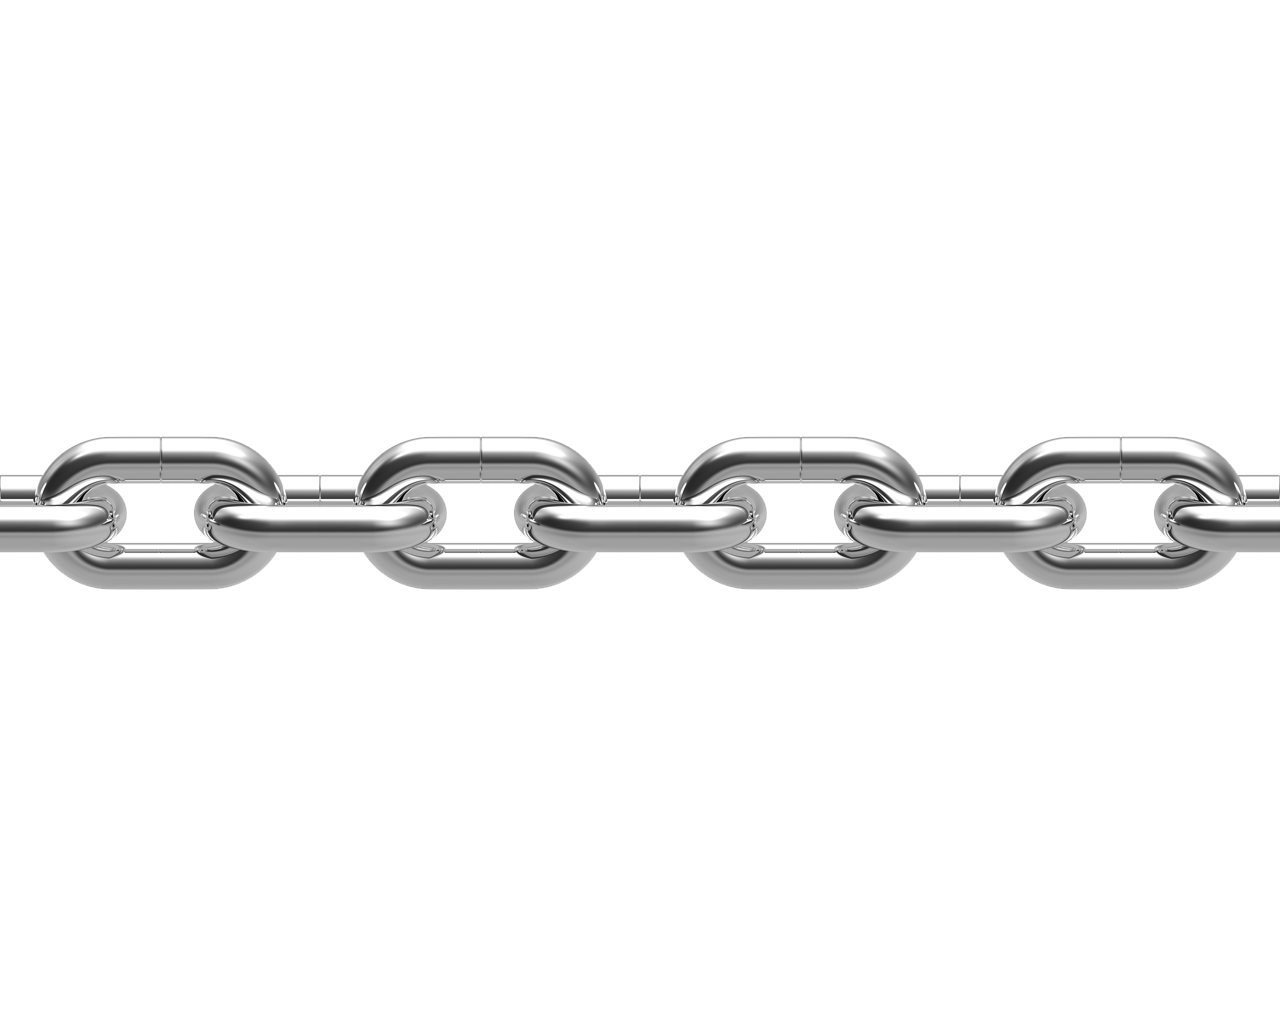 Chain Png Transparent Image Download Size 1280x1024px